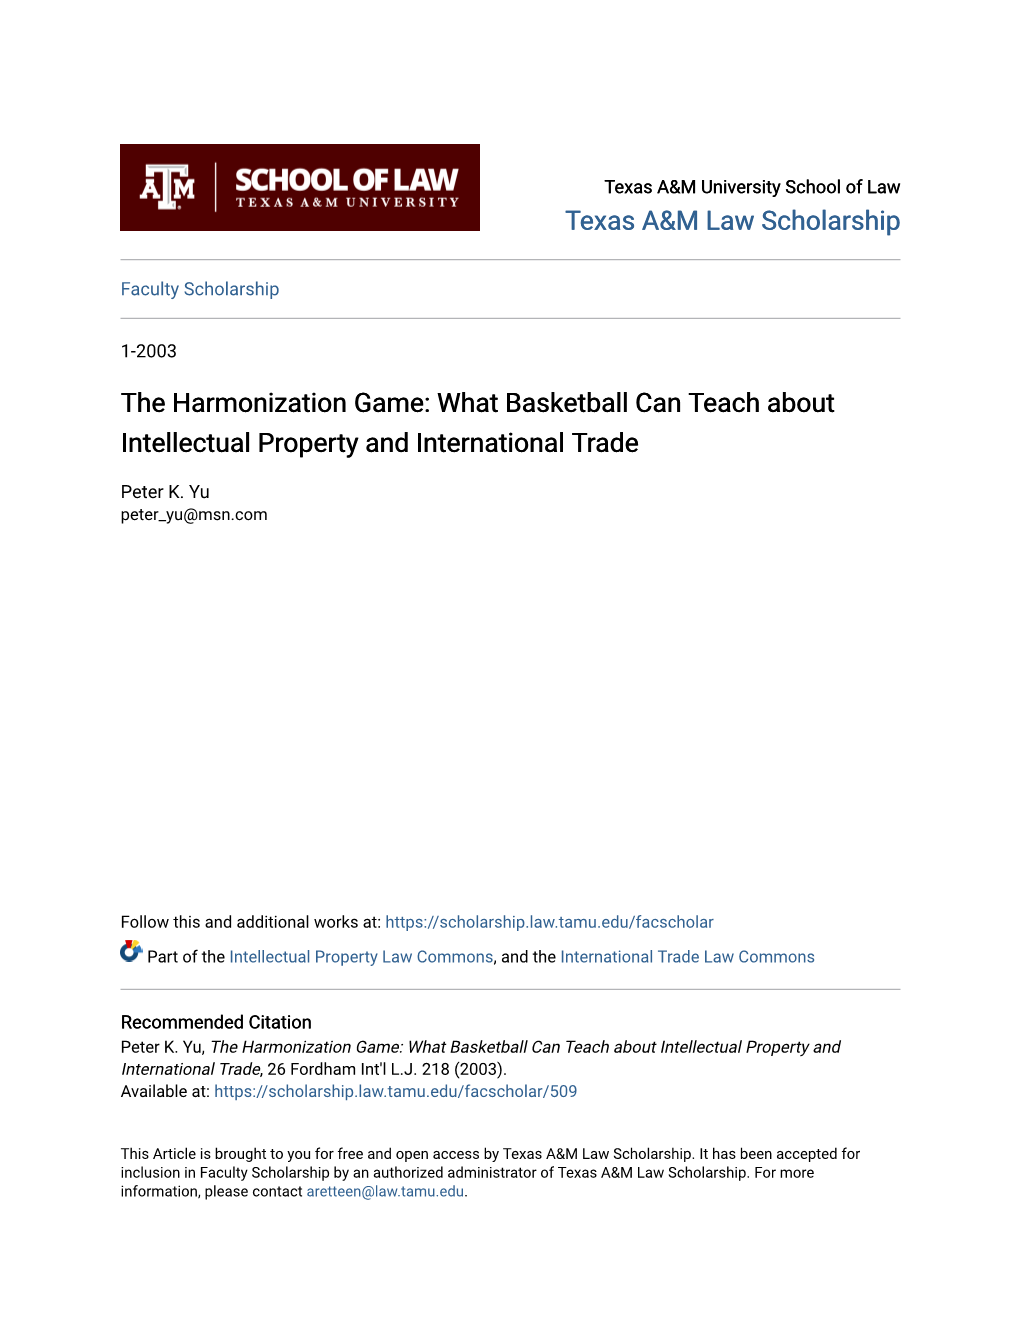 The Harmonization Game: What Basketball Can Teach About Intellectual Property and International Trade